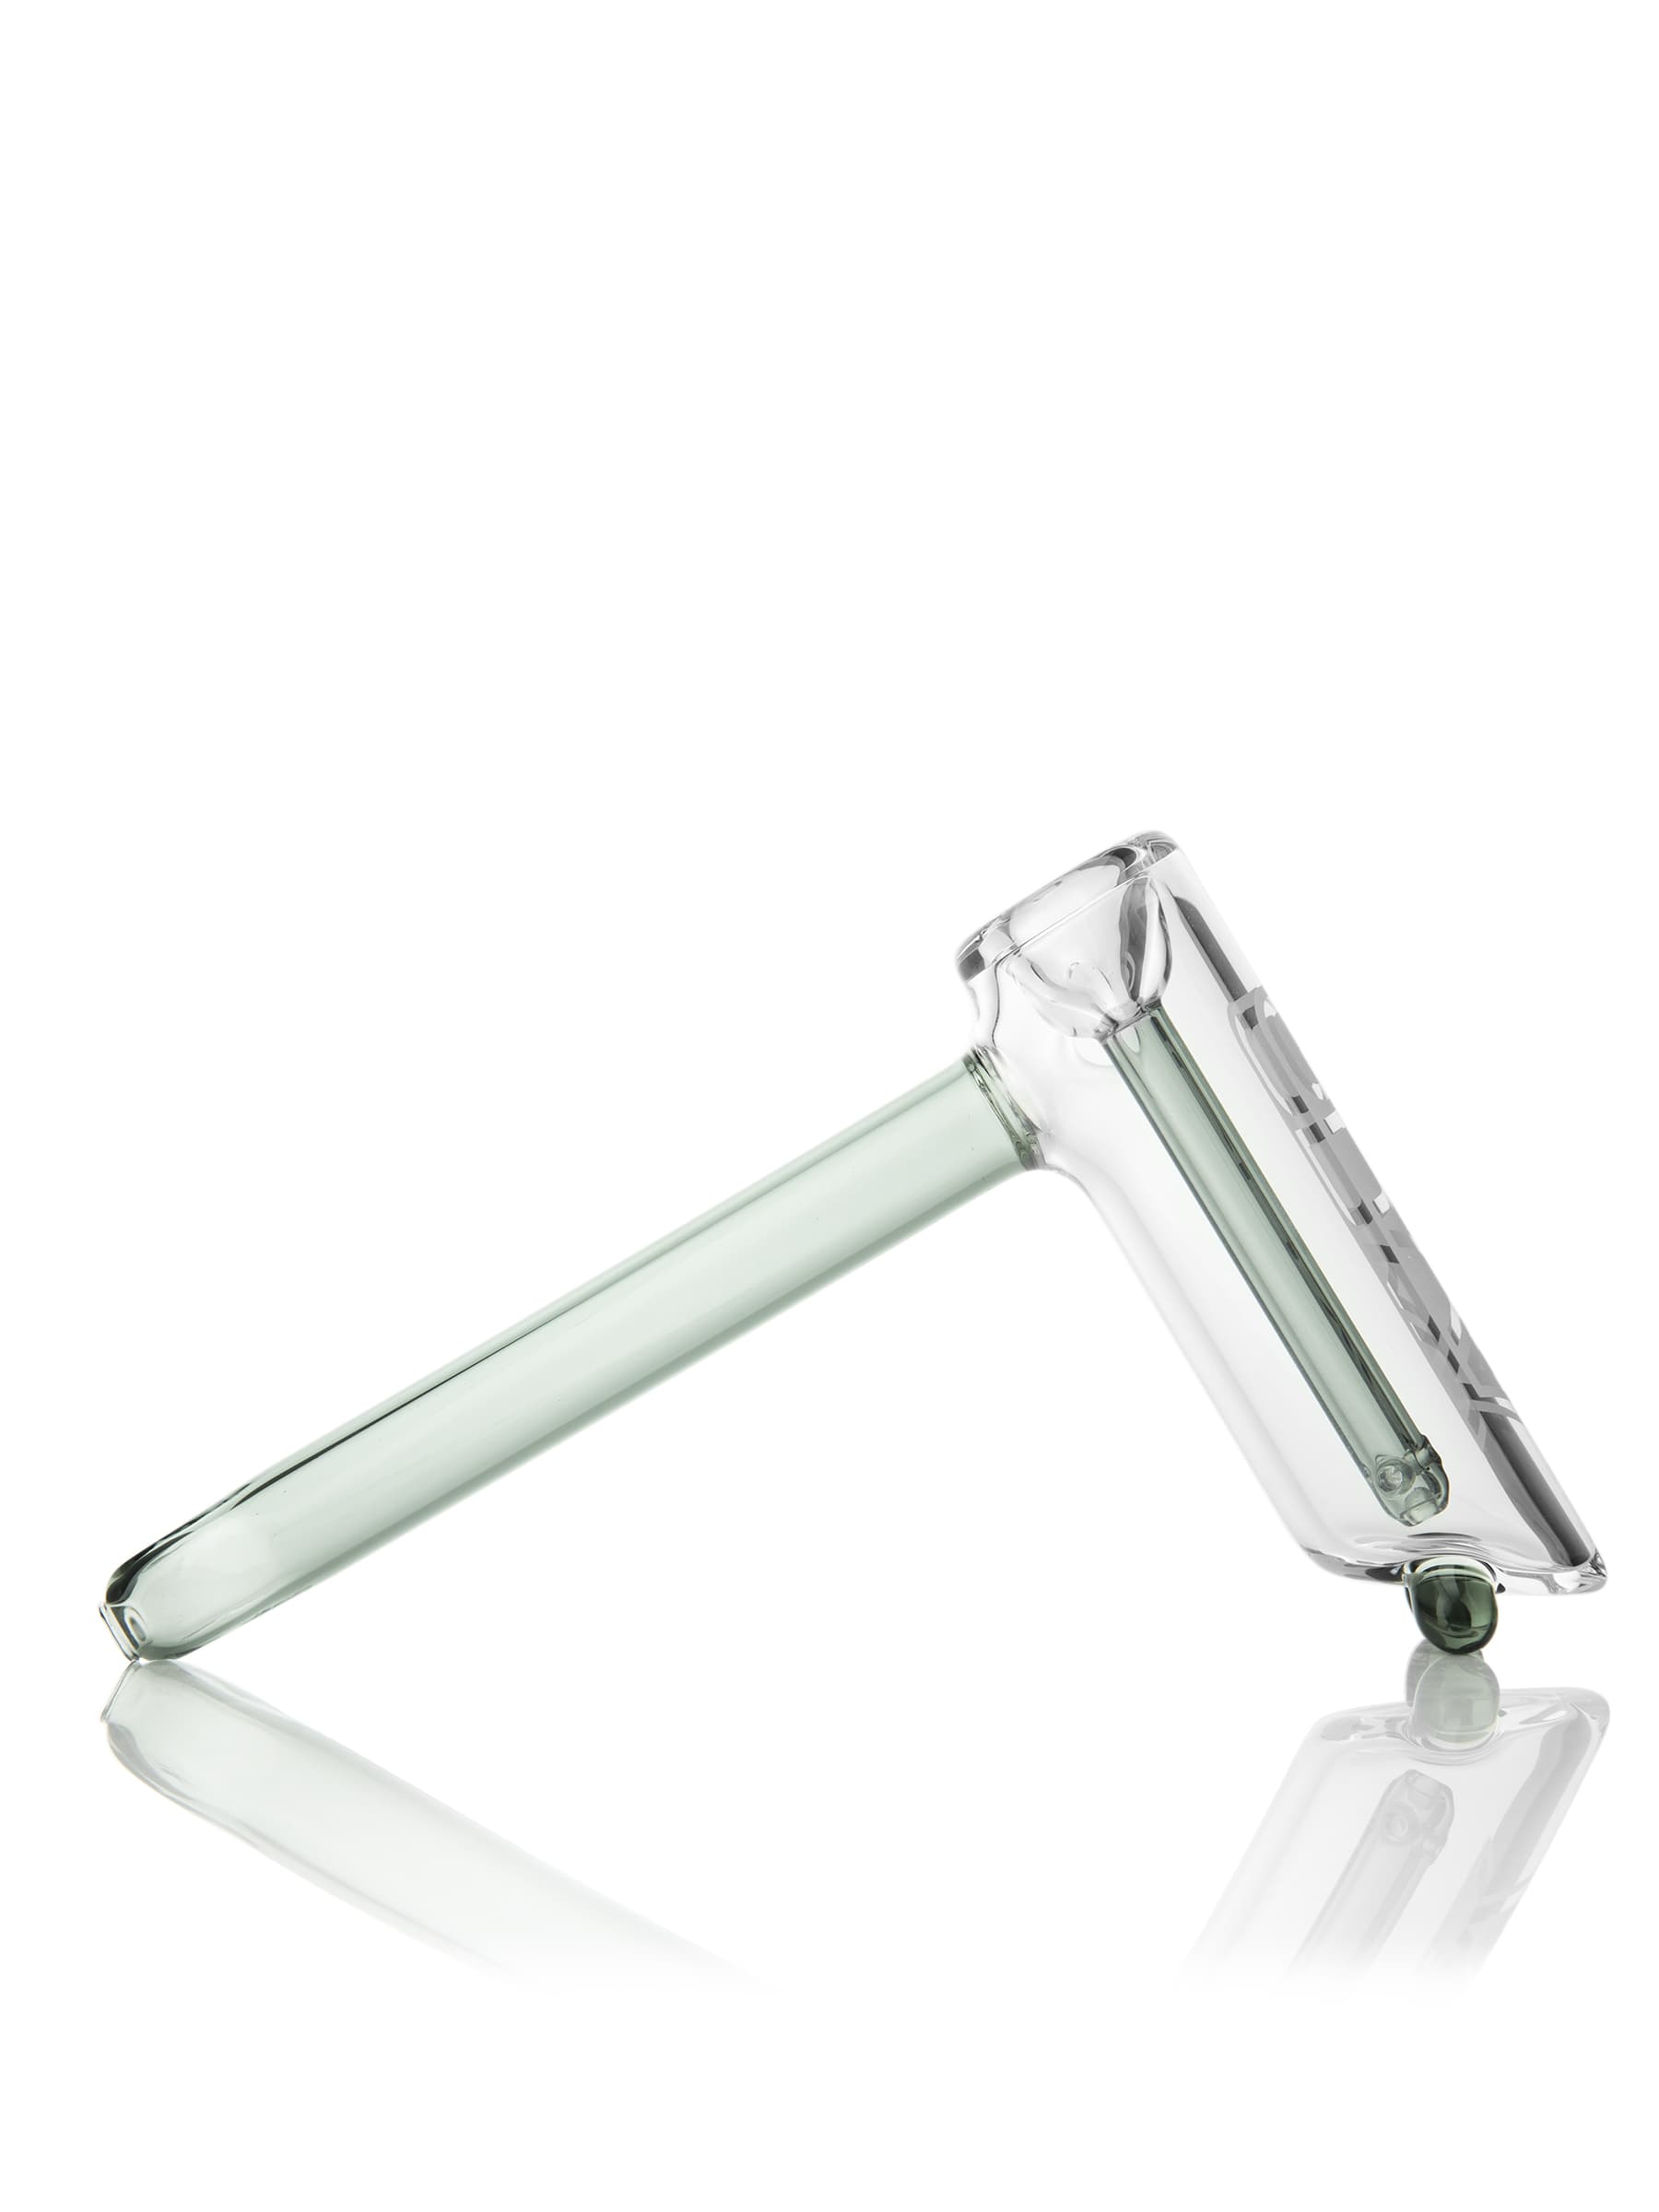 GRAV® Hammer Bubbler - Colored Accents - Legacy Style